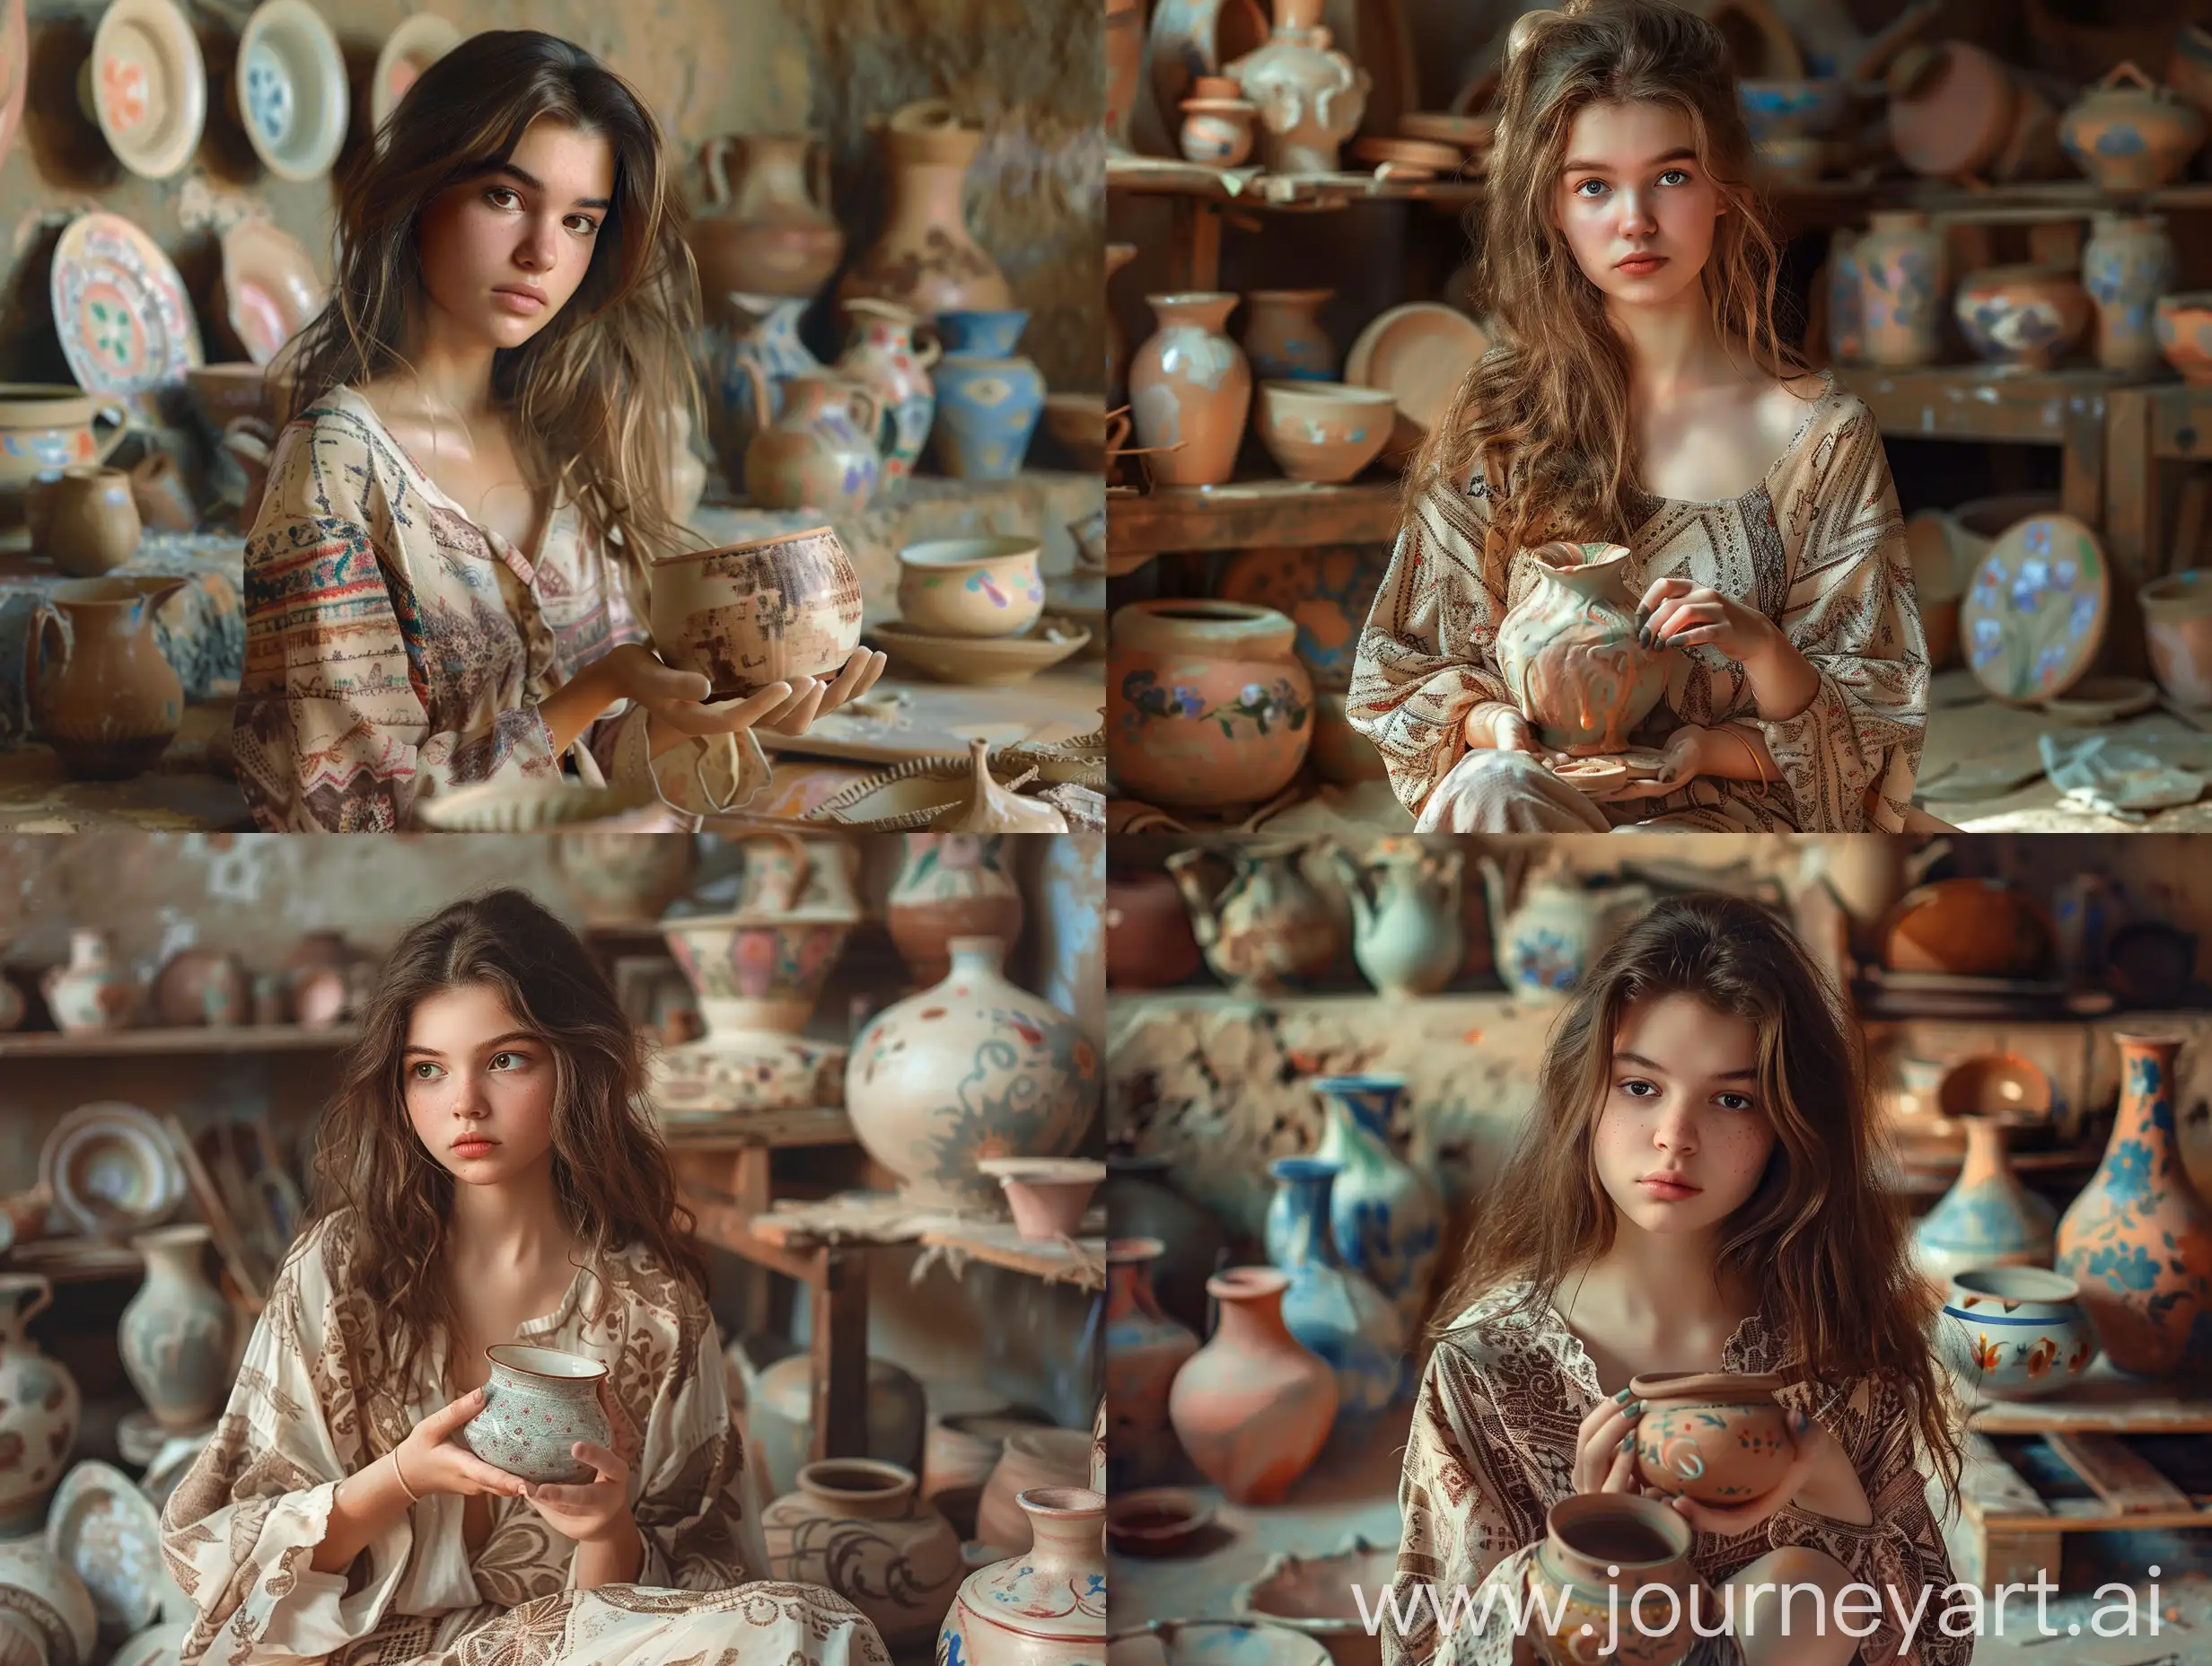 A young woman with her hair down, sitting in a clay workshop, painted dishes and various vases in the background.
A girl with a natural and innocent appearance holds a handmade ceramic product in her hands, dressed in clothes with a light pattern similar to the painting on handmade ceramic products.
The colors, in particular, are pastel: beige, brown, pale pink, dark blue.
Make everything as realistic as possible